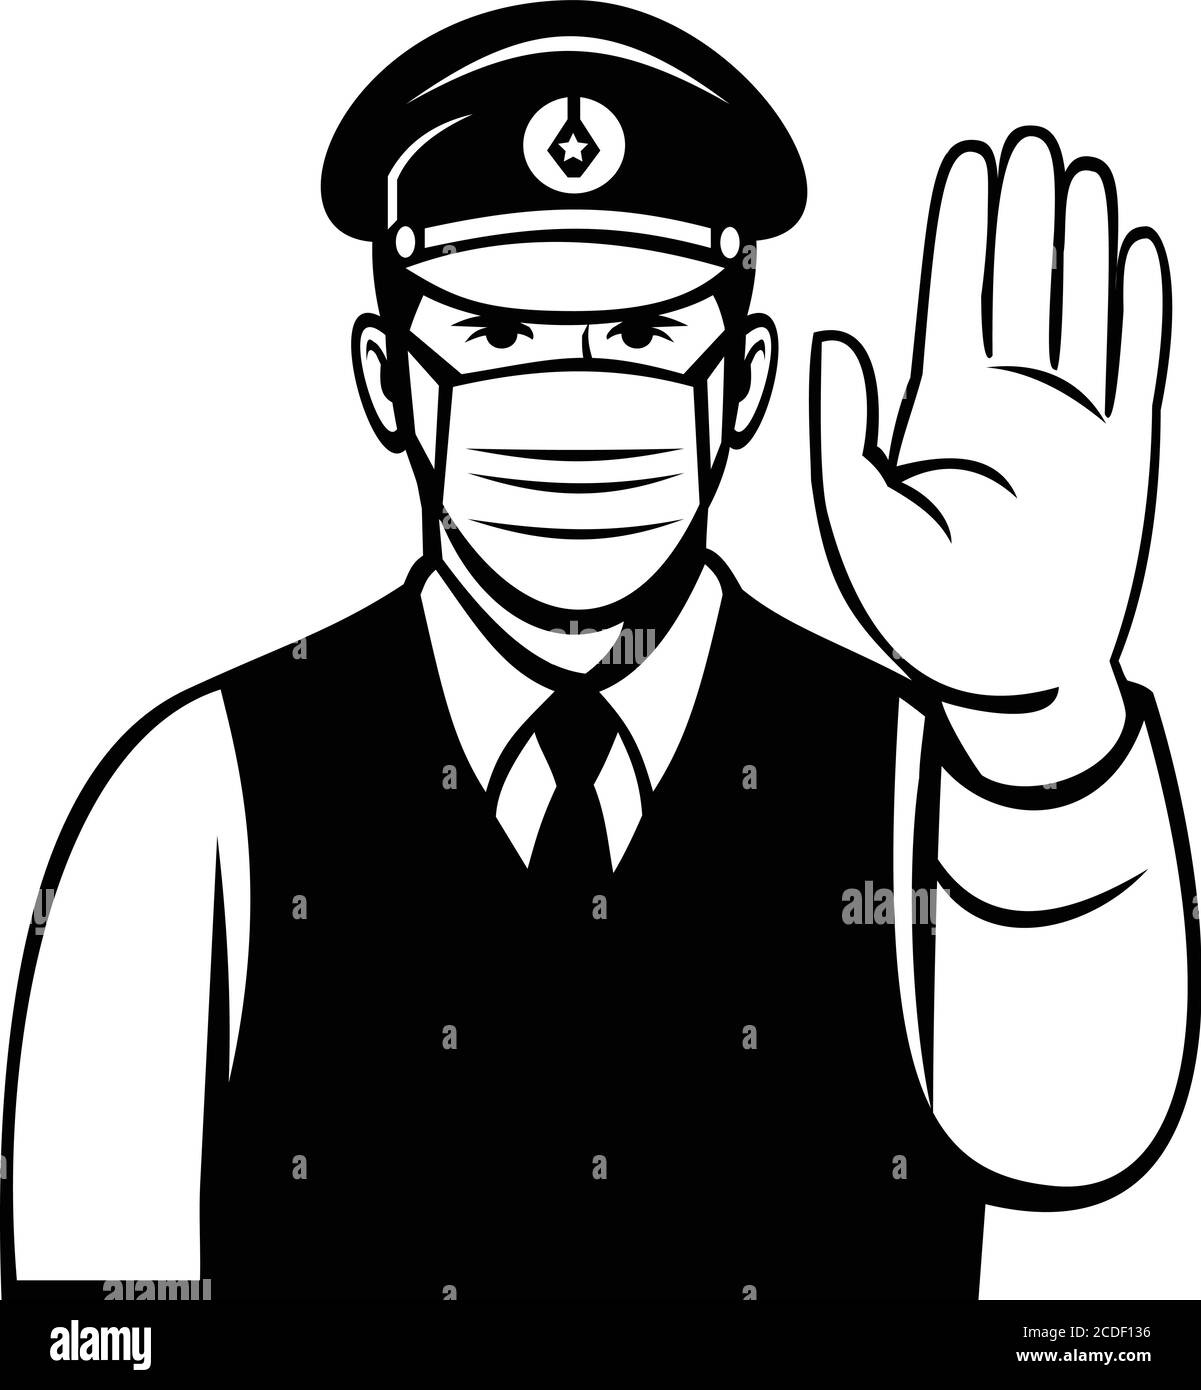 Black and white cartoon illustration of a Japanese policeman or police officer wearing face mask or covering showing stop hand signal viewed from fron Stock Vector